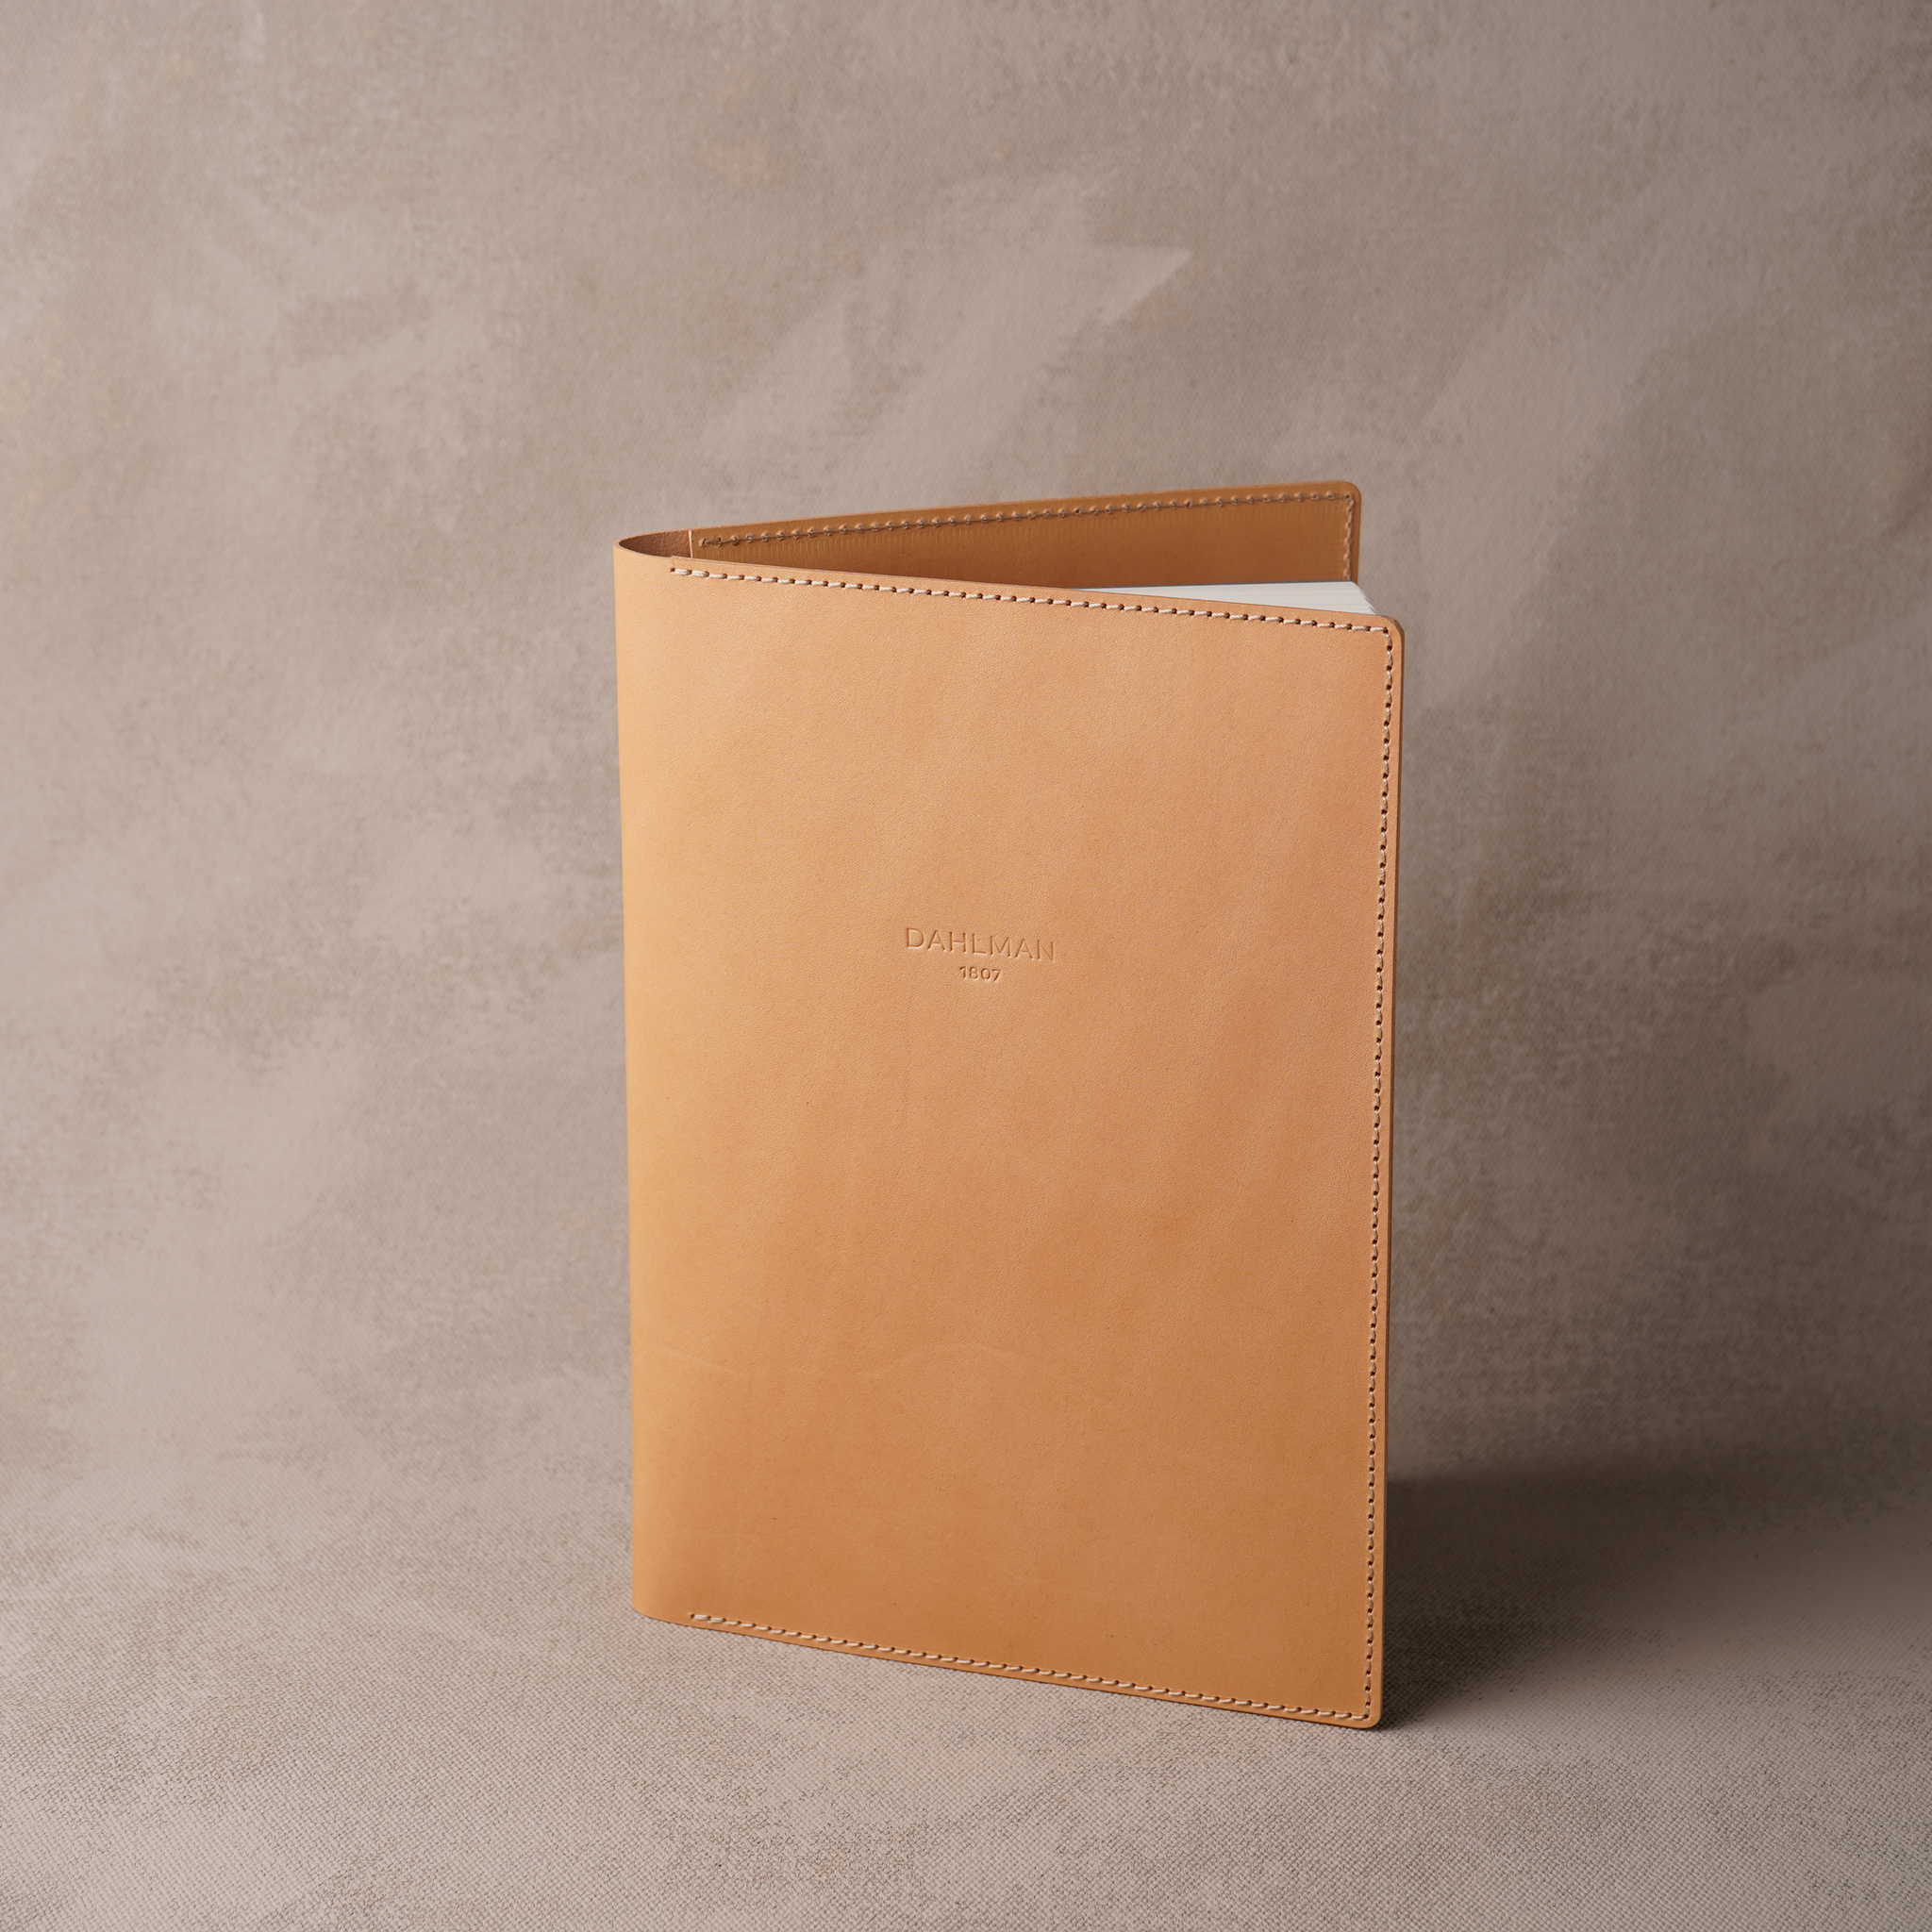 Notebook Cover, Tan